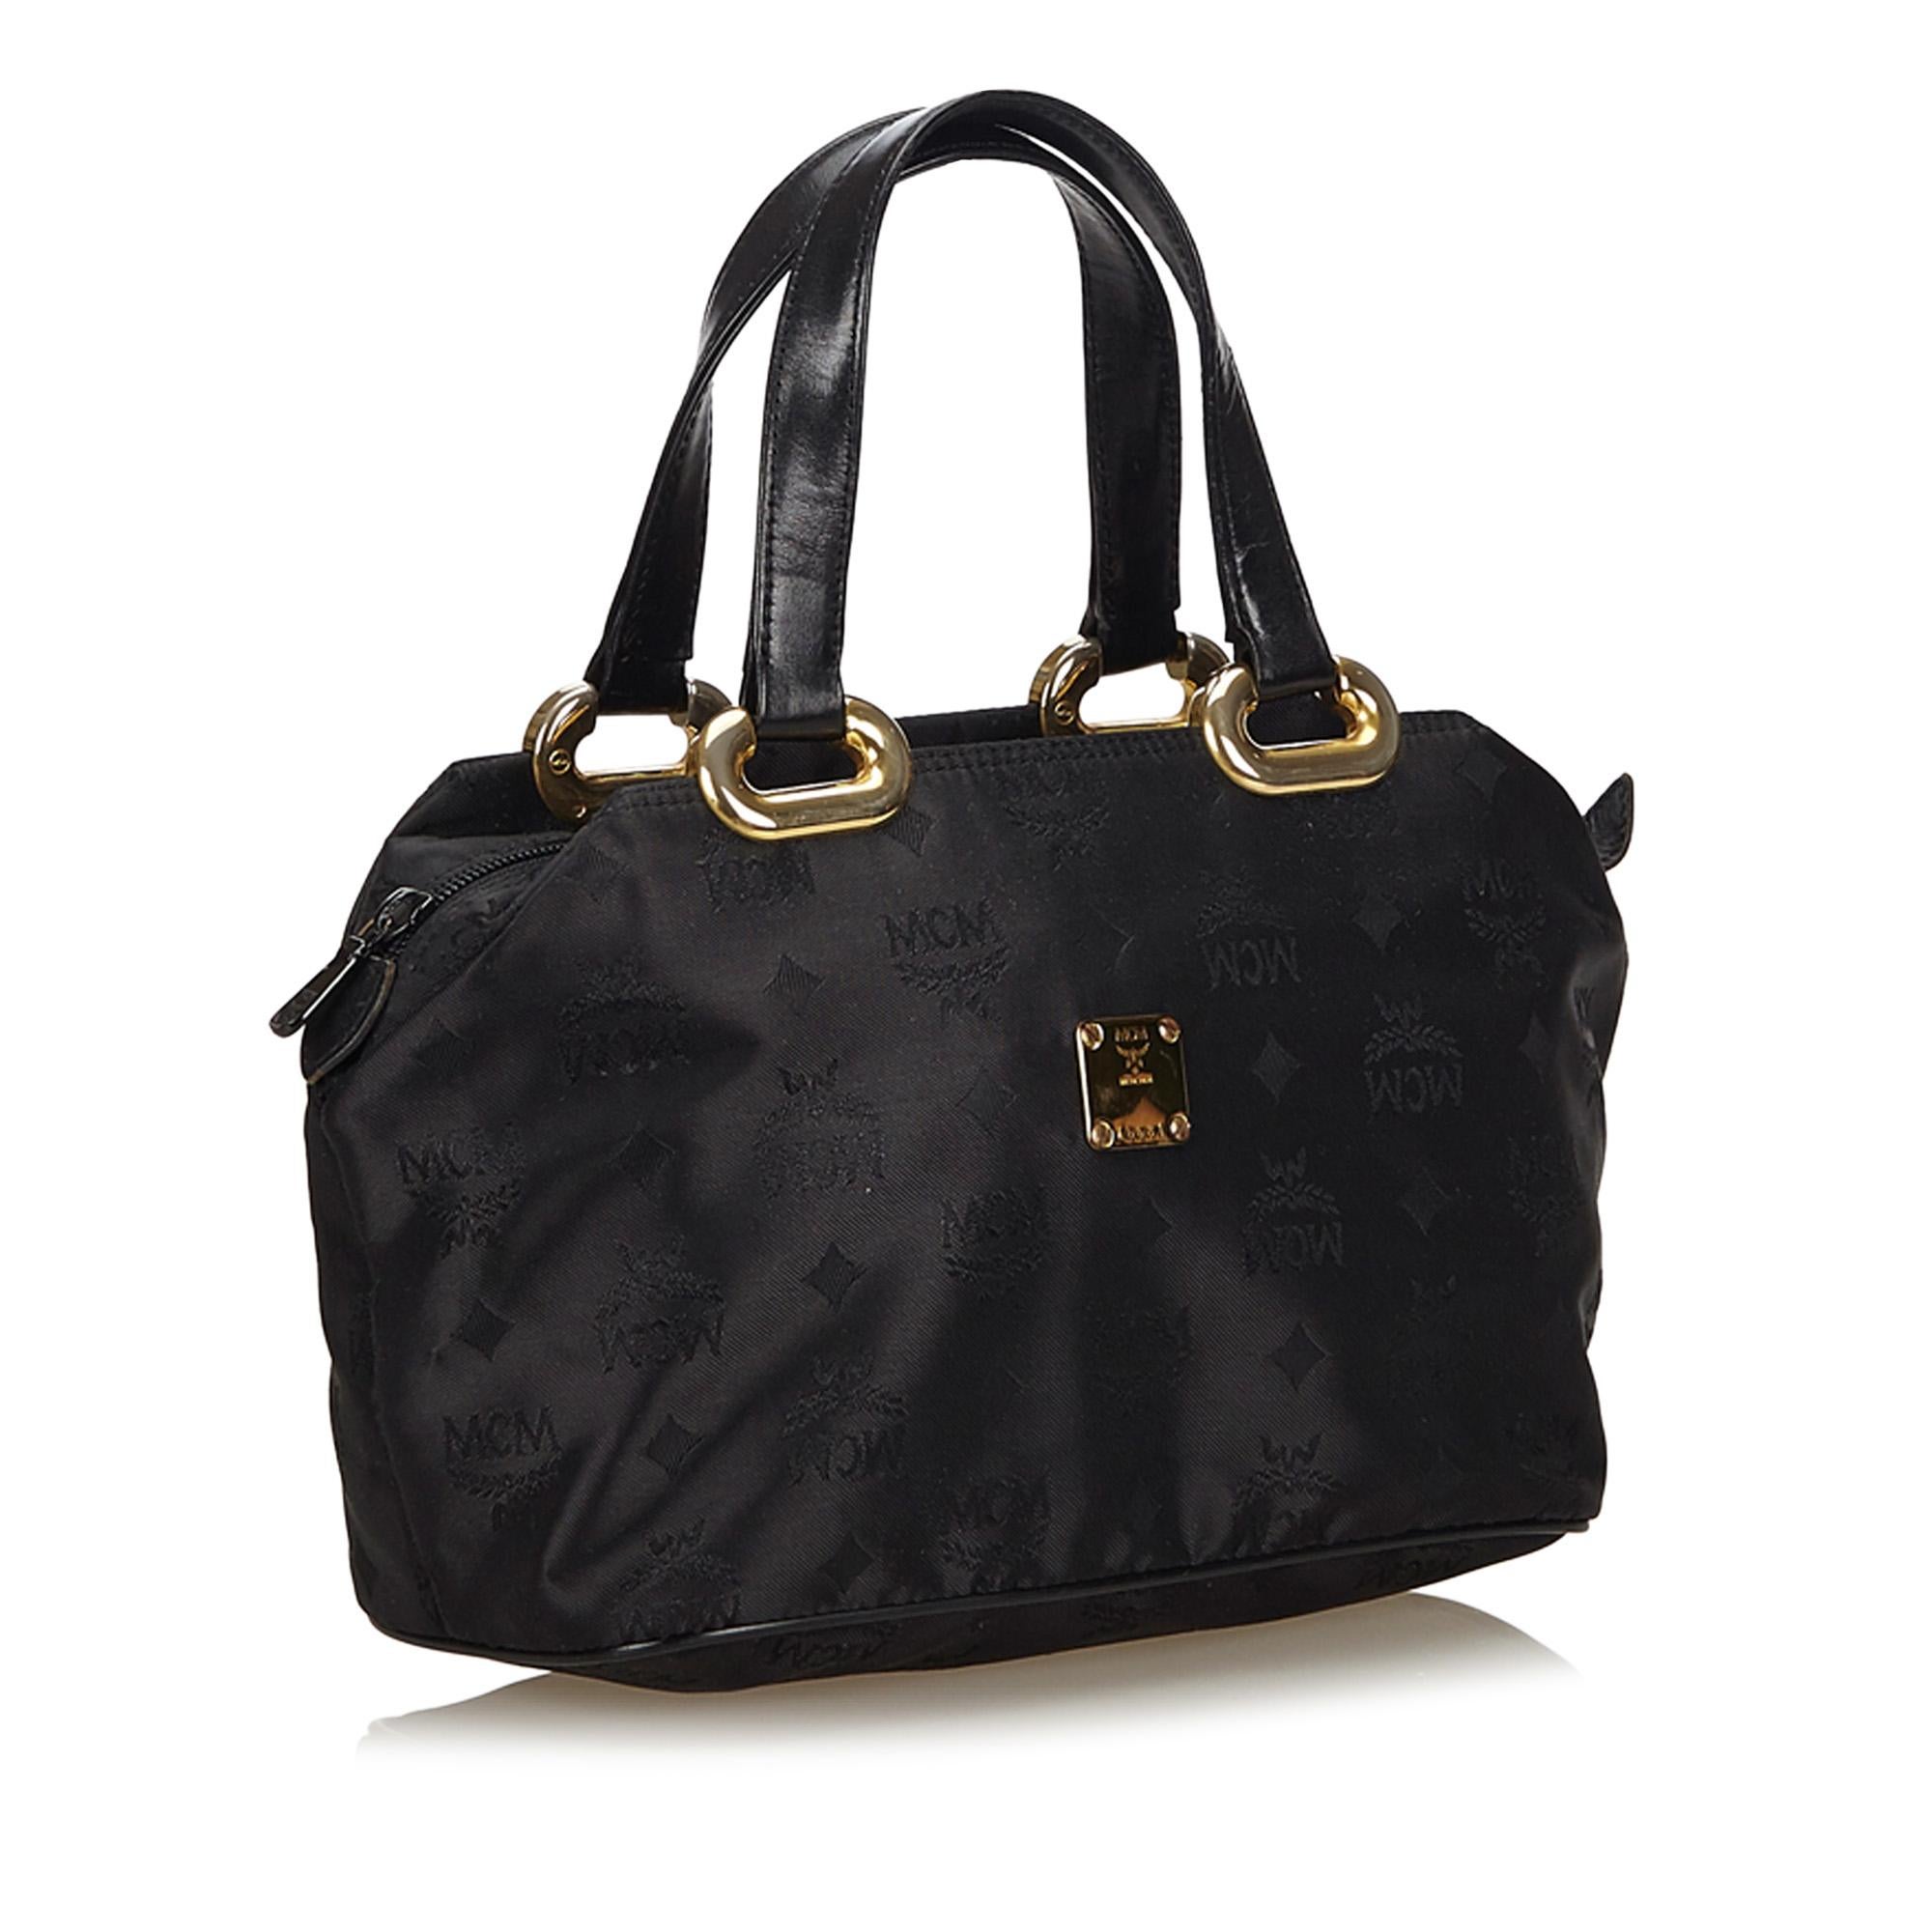 This handbag features a nylon body, gold-tone hardware, a top zip closure, and an interior zip pocket. It carries as B condition rating.

Inclusions: 
This item does not come with inclusions.

Dimensions:
Length: 34.00 cm
Width: 17.50 cm
Depth: